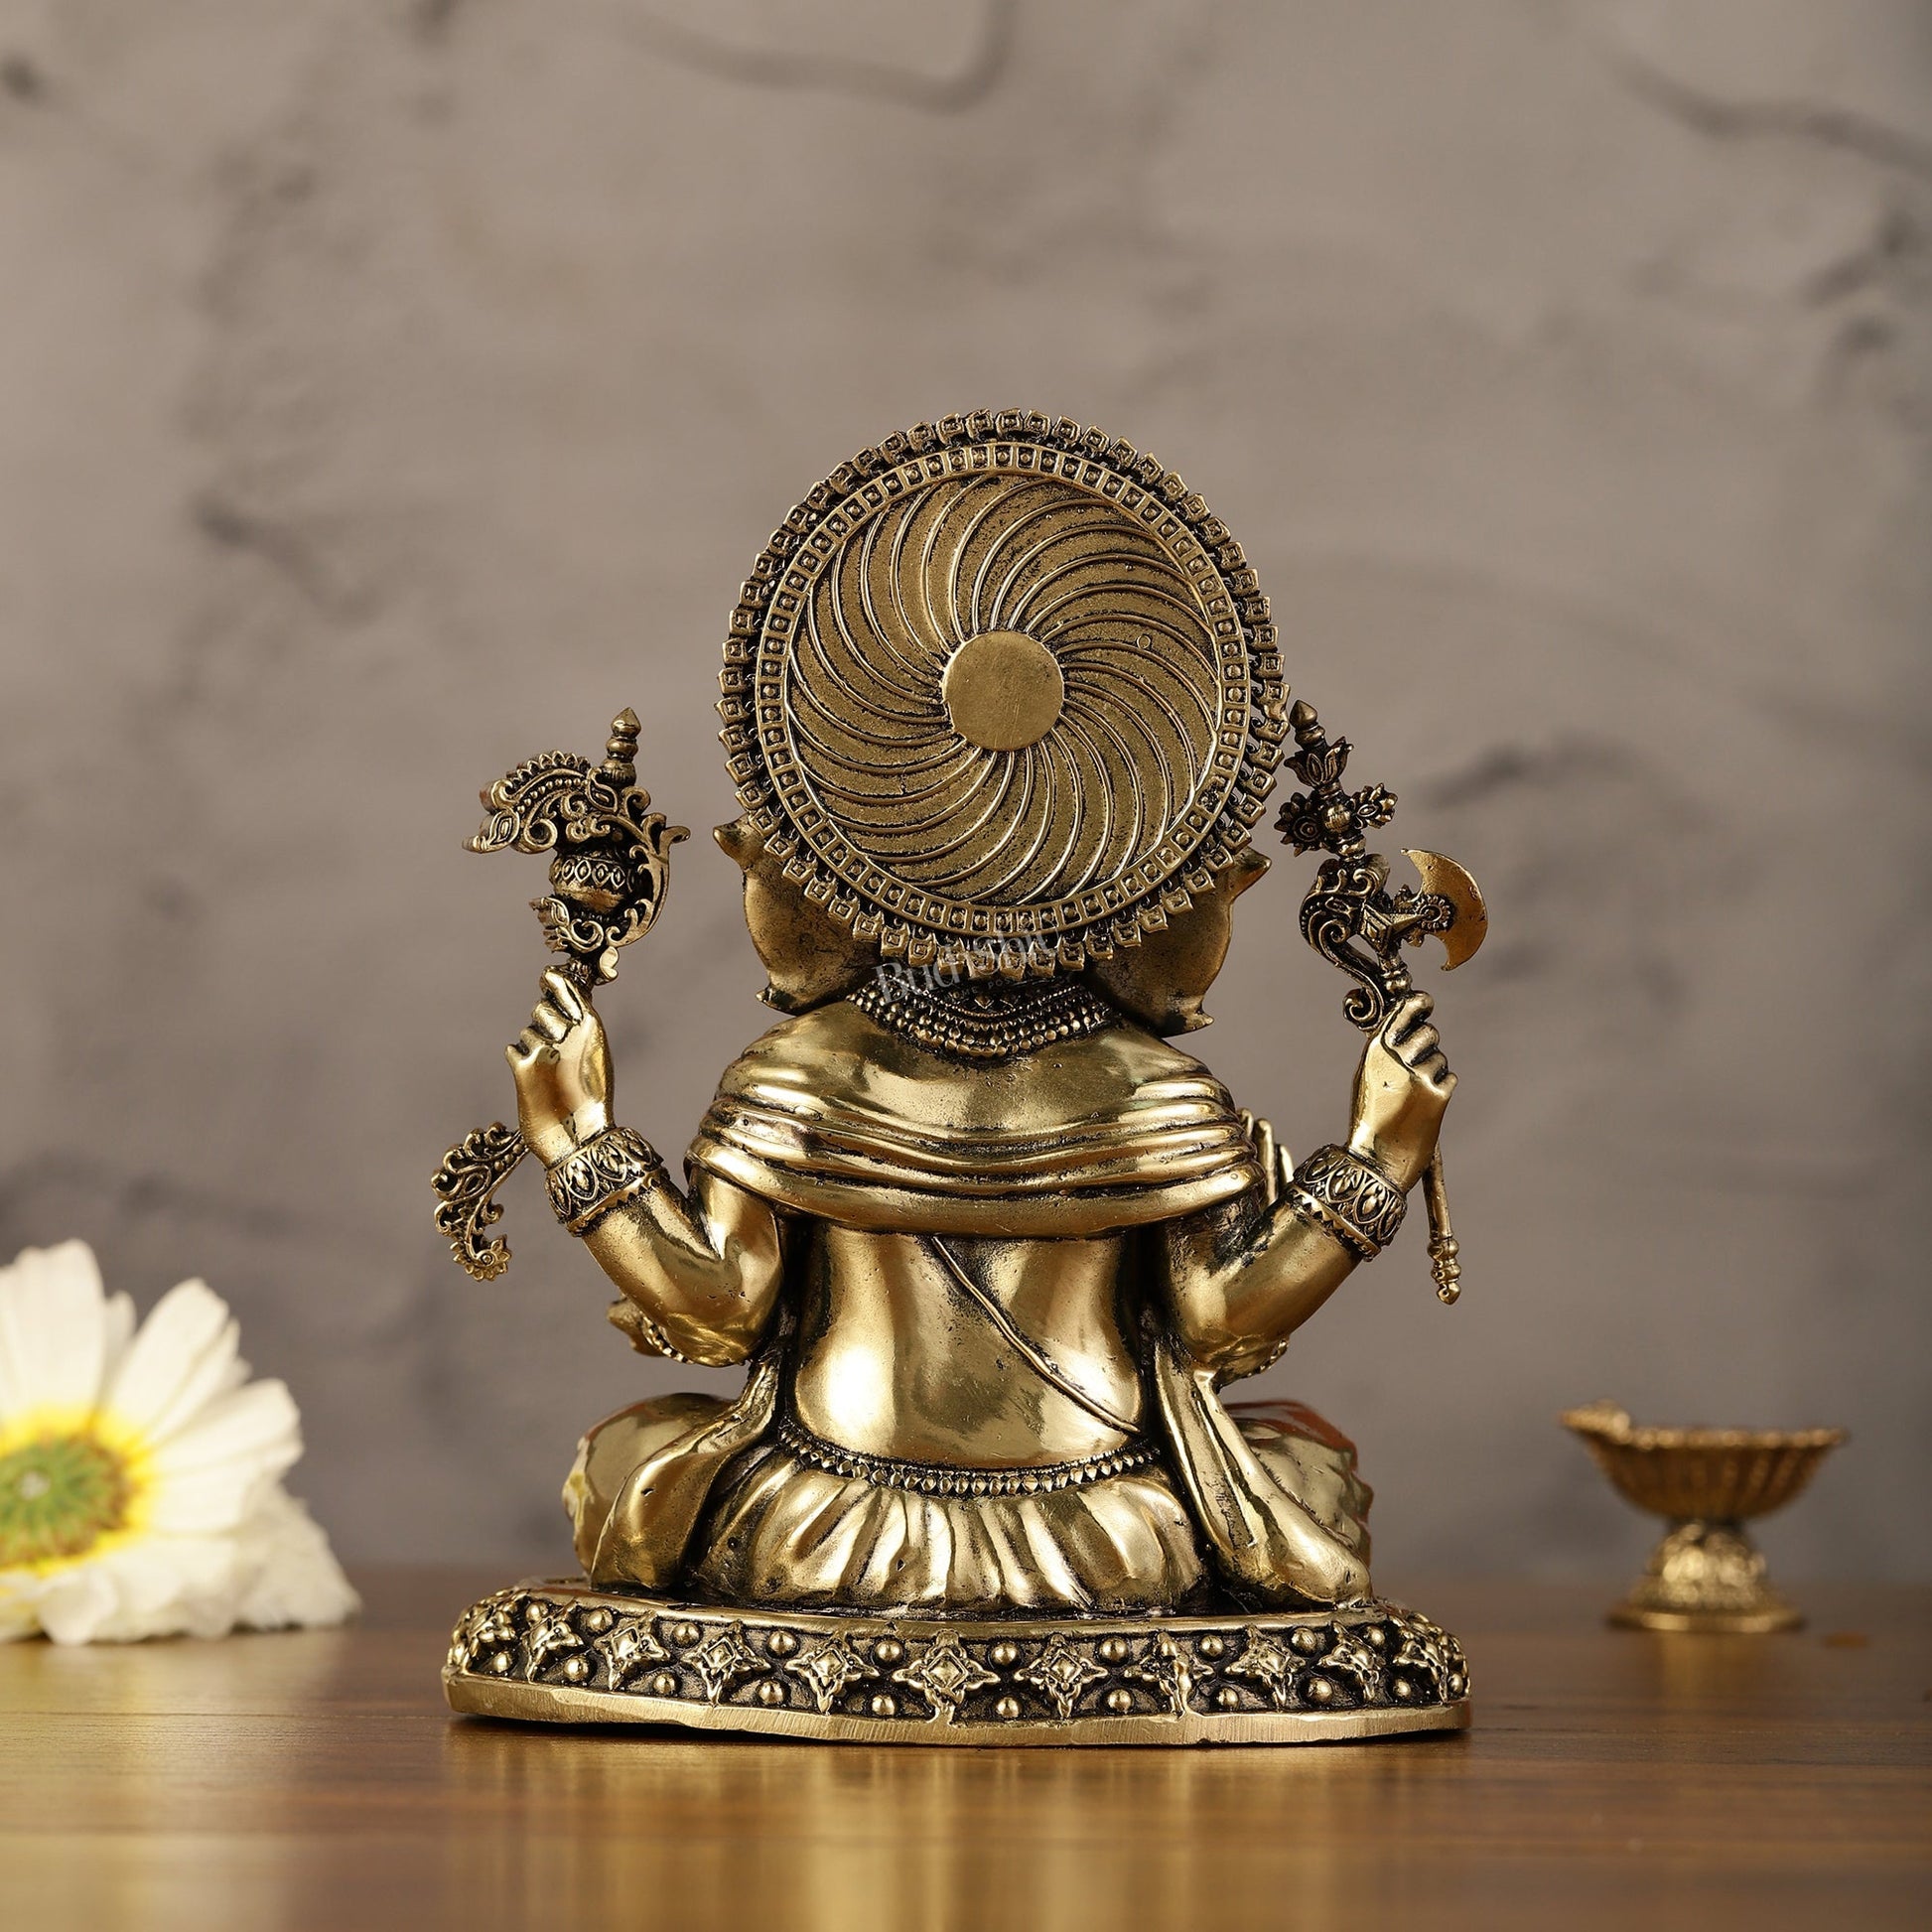 Intricately Crafted Pure superfine Brass Lord Ganesha Statue - 6.5" - Budhshiv.com